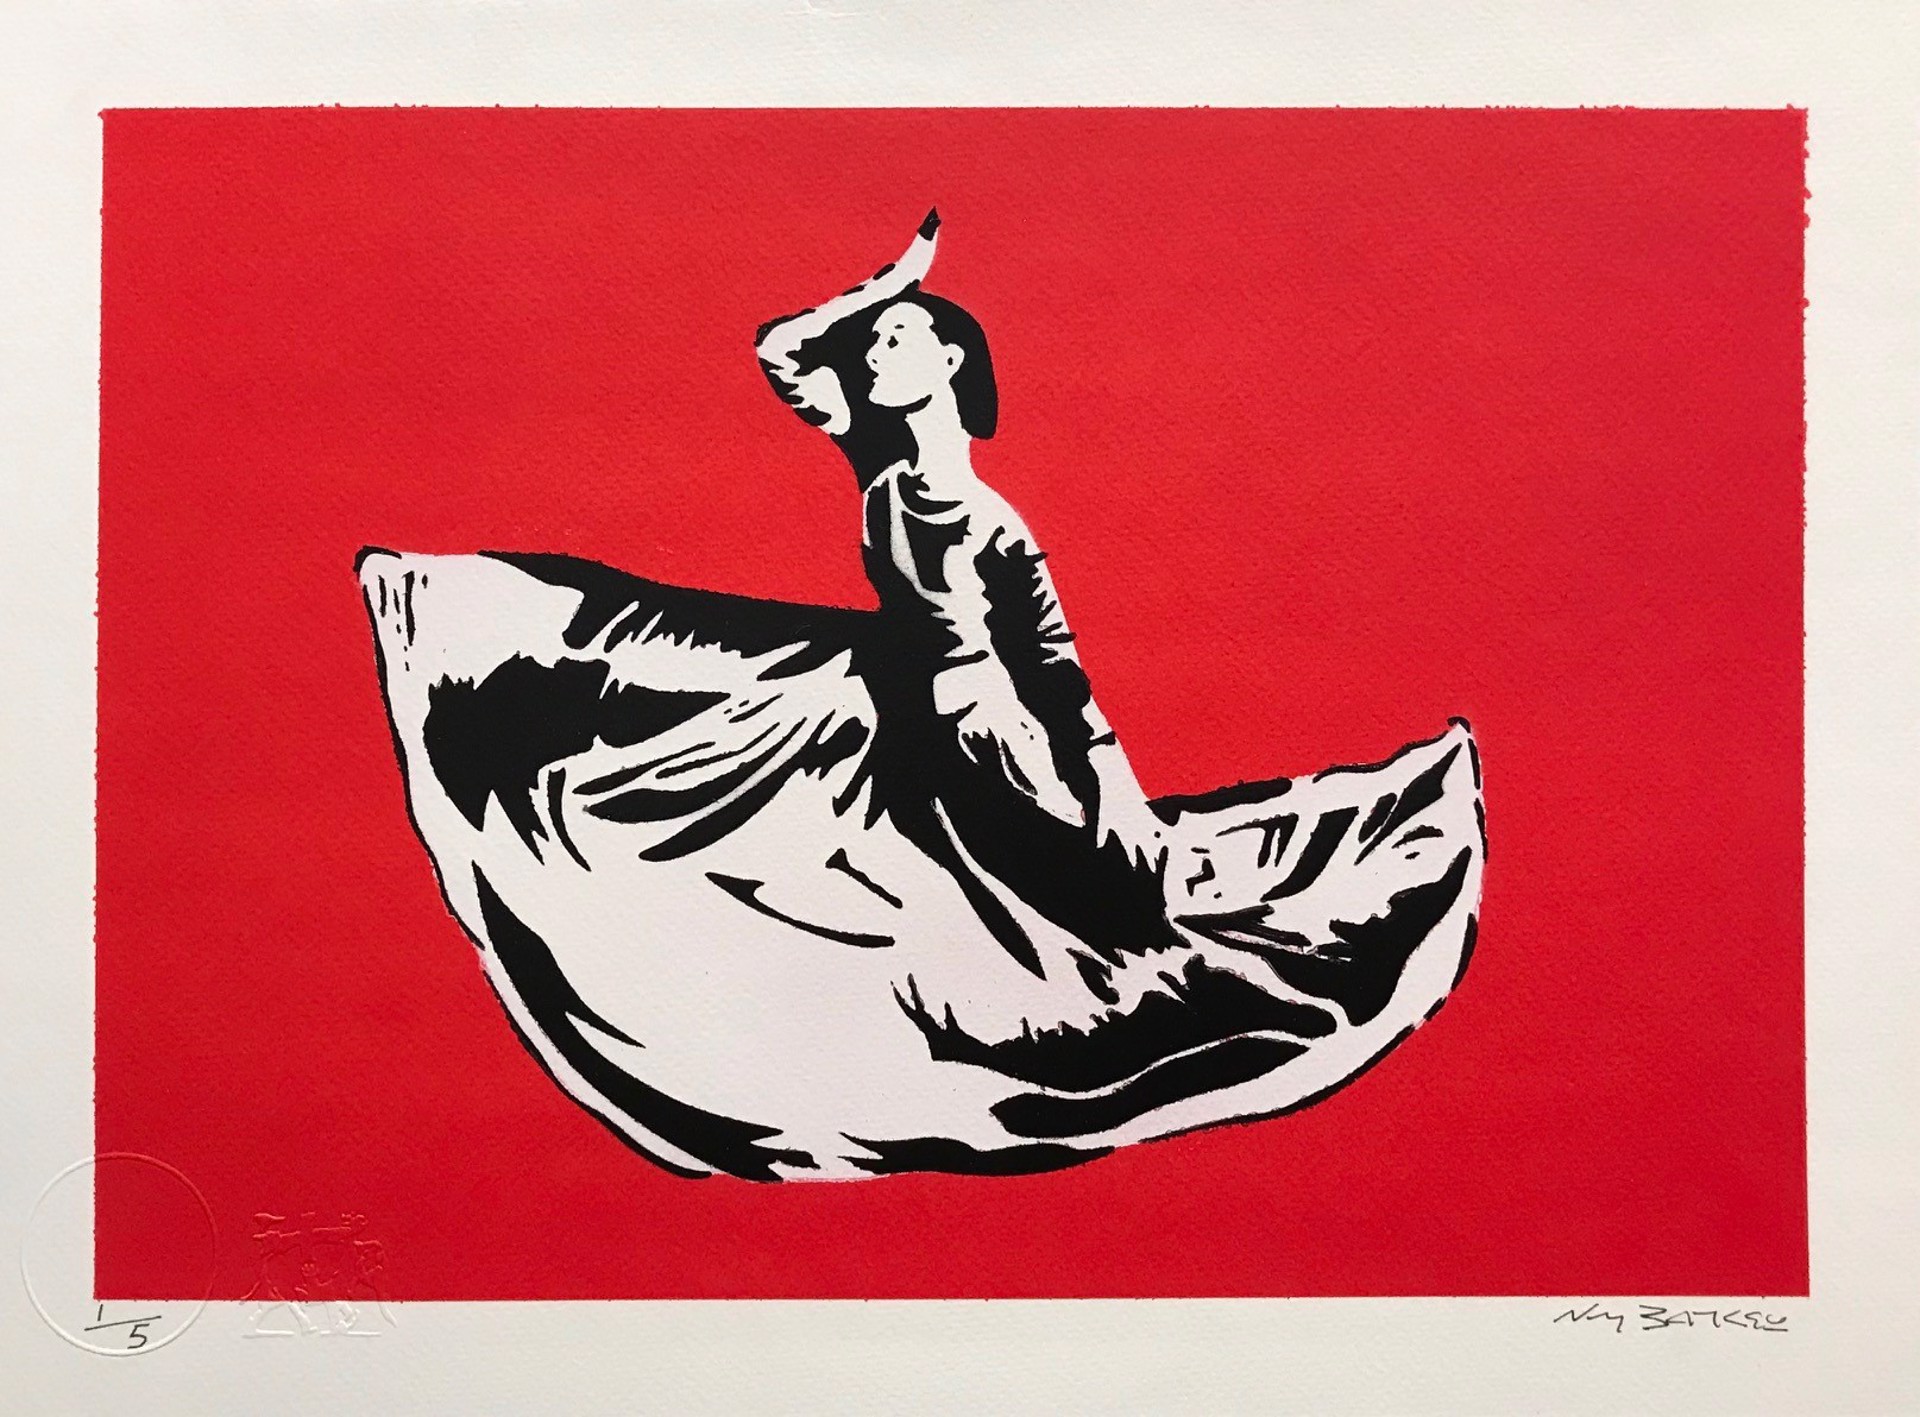 Dancer (Red) by Not Banksy